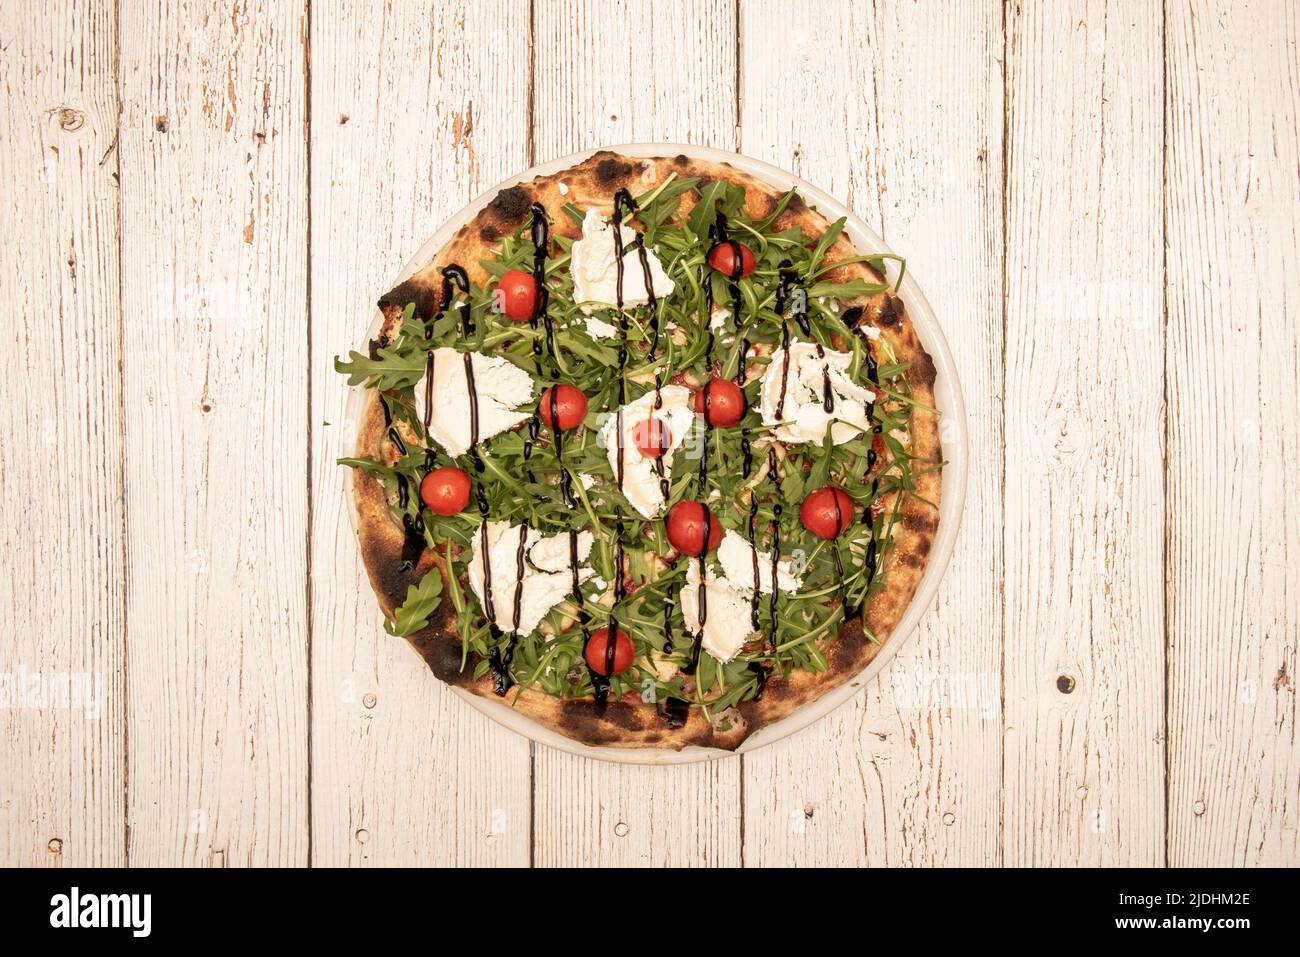 Top view image of pizza with arugula, goat cheese, cherry tomatoes and balsamic of modena Stock Photo